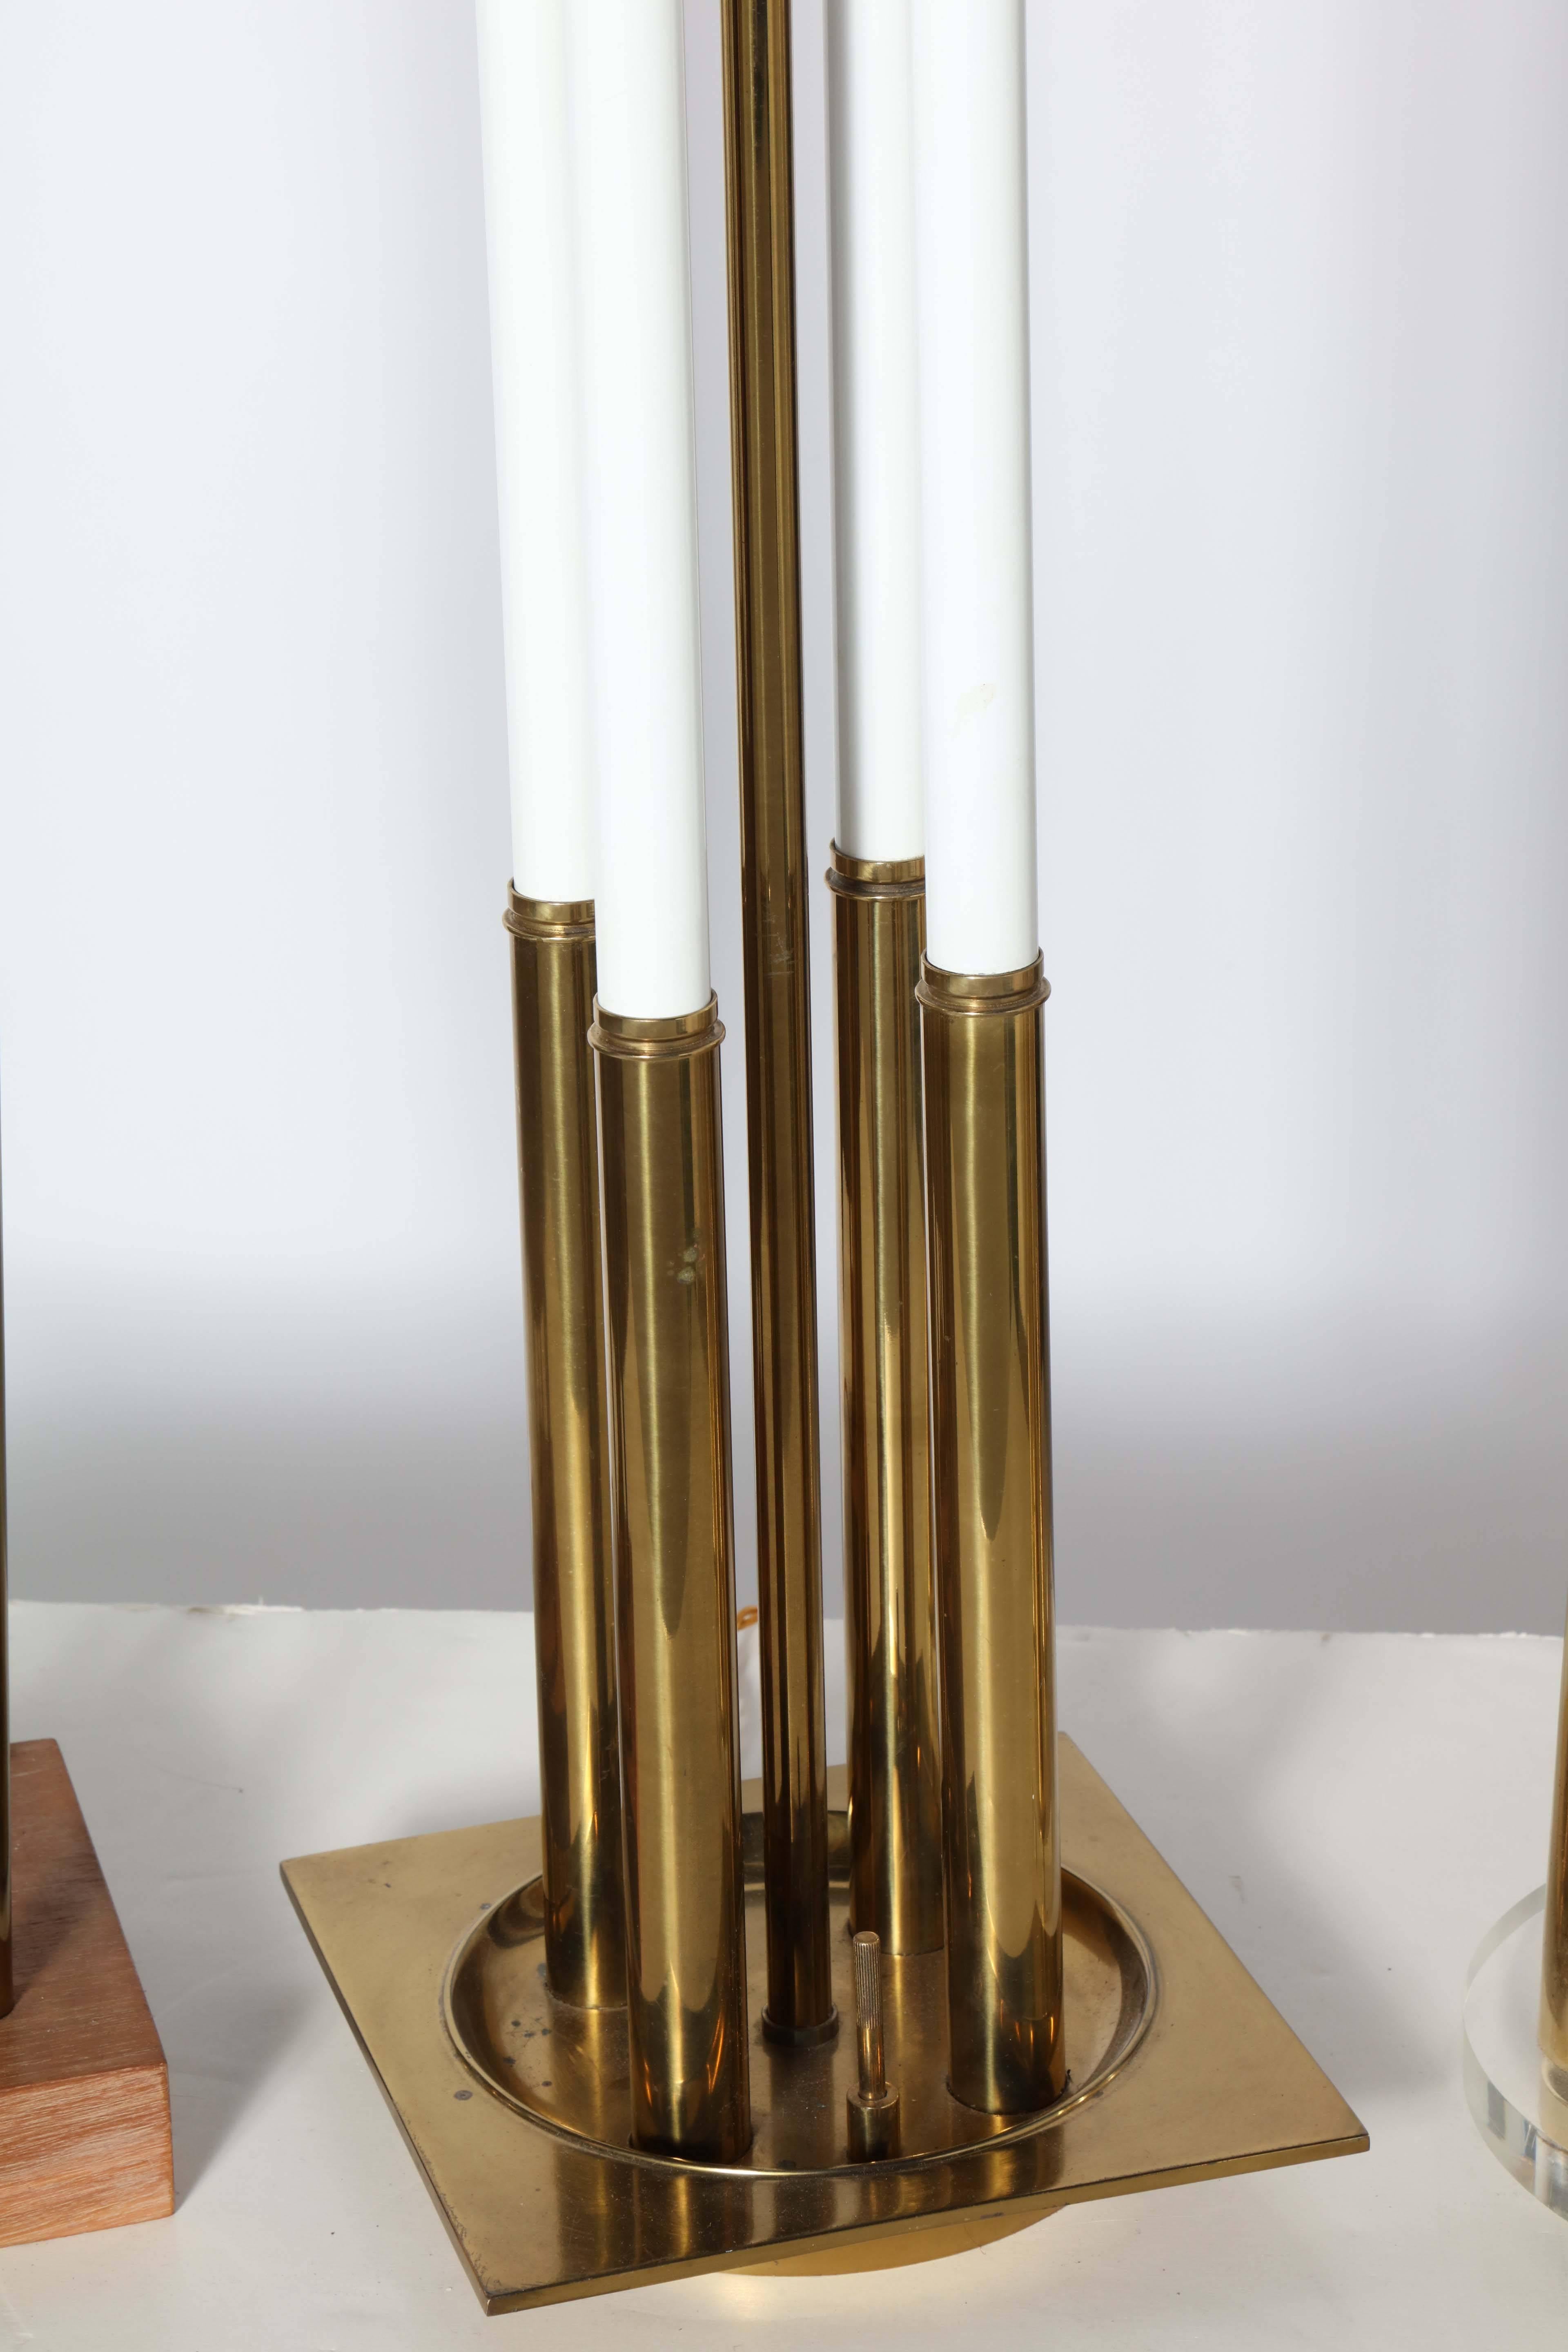 Enameled Monumental Stiffel Lamp Co. Candlestick Table Lamps, Tommi Parzinger Style 